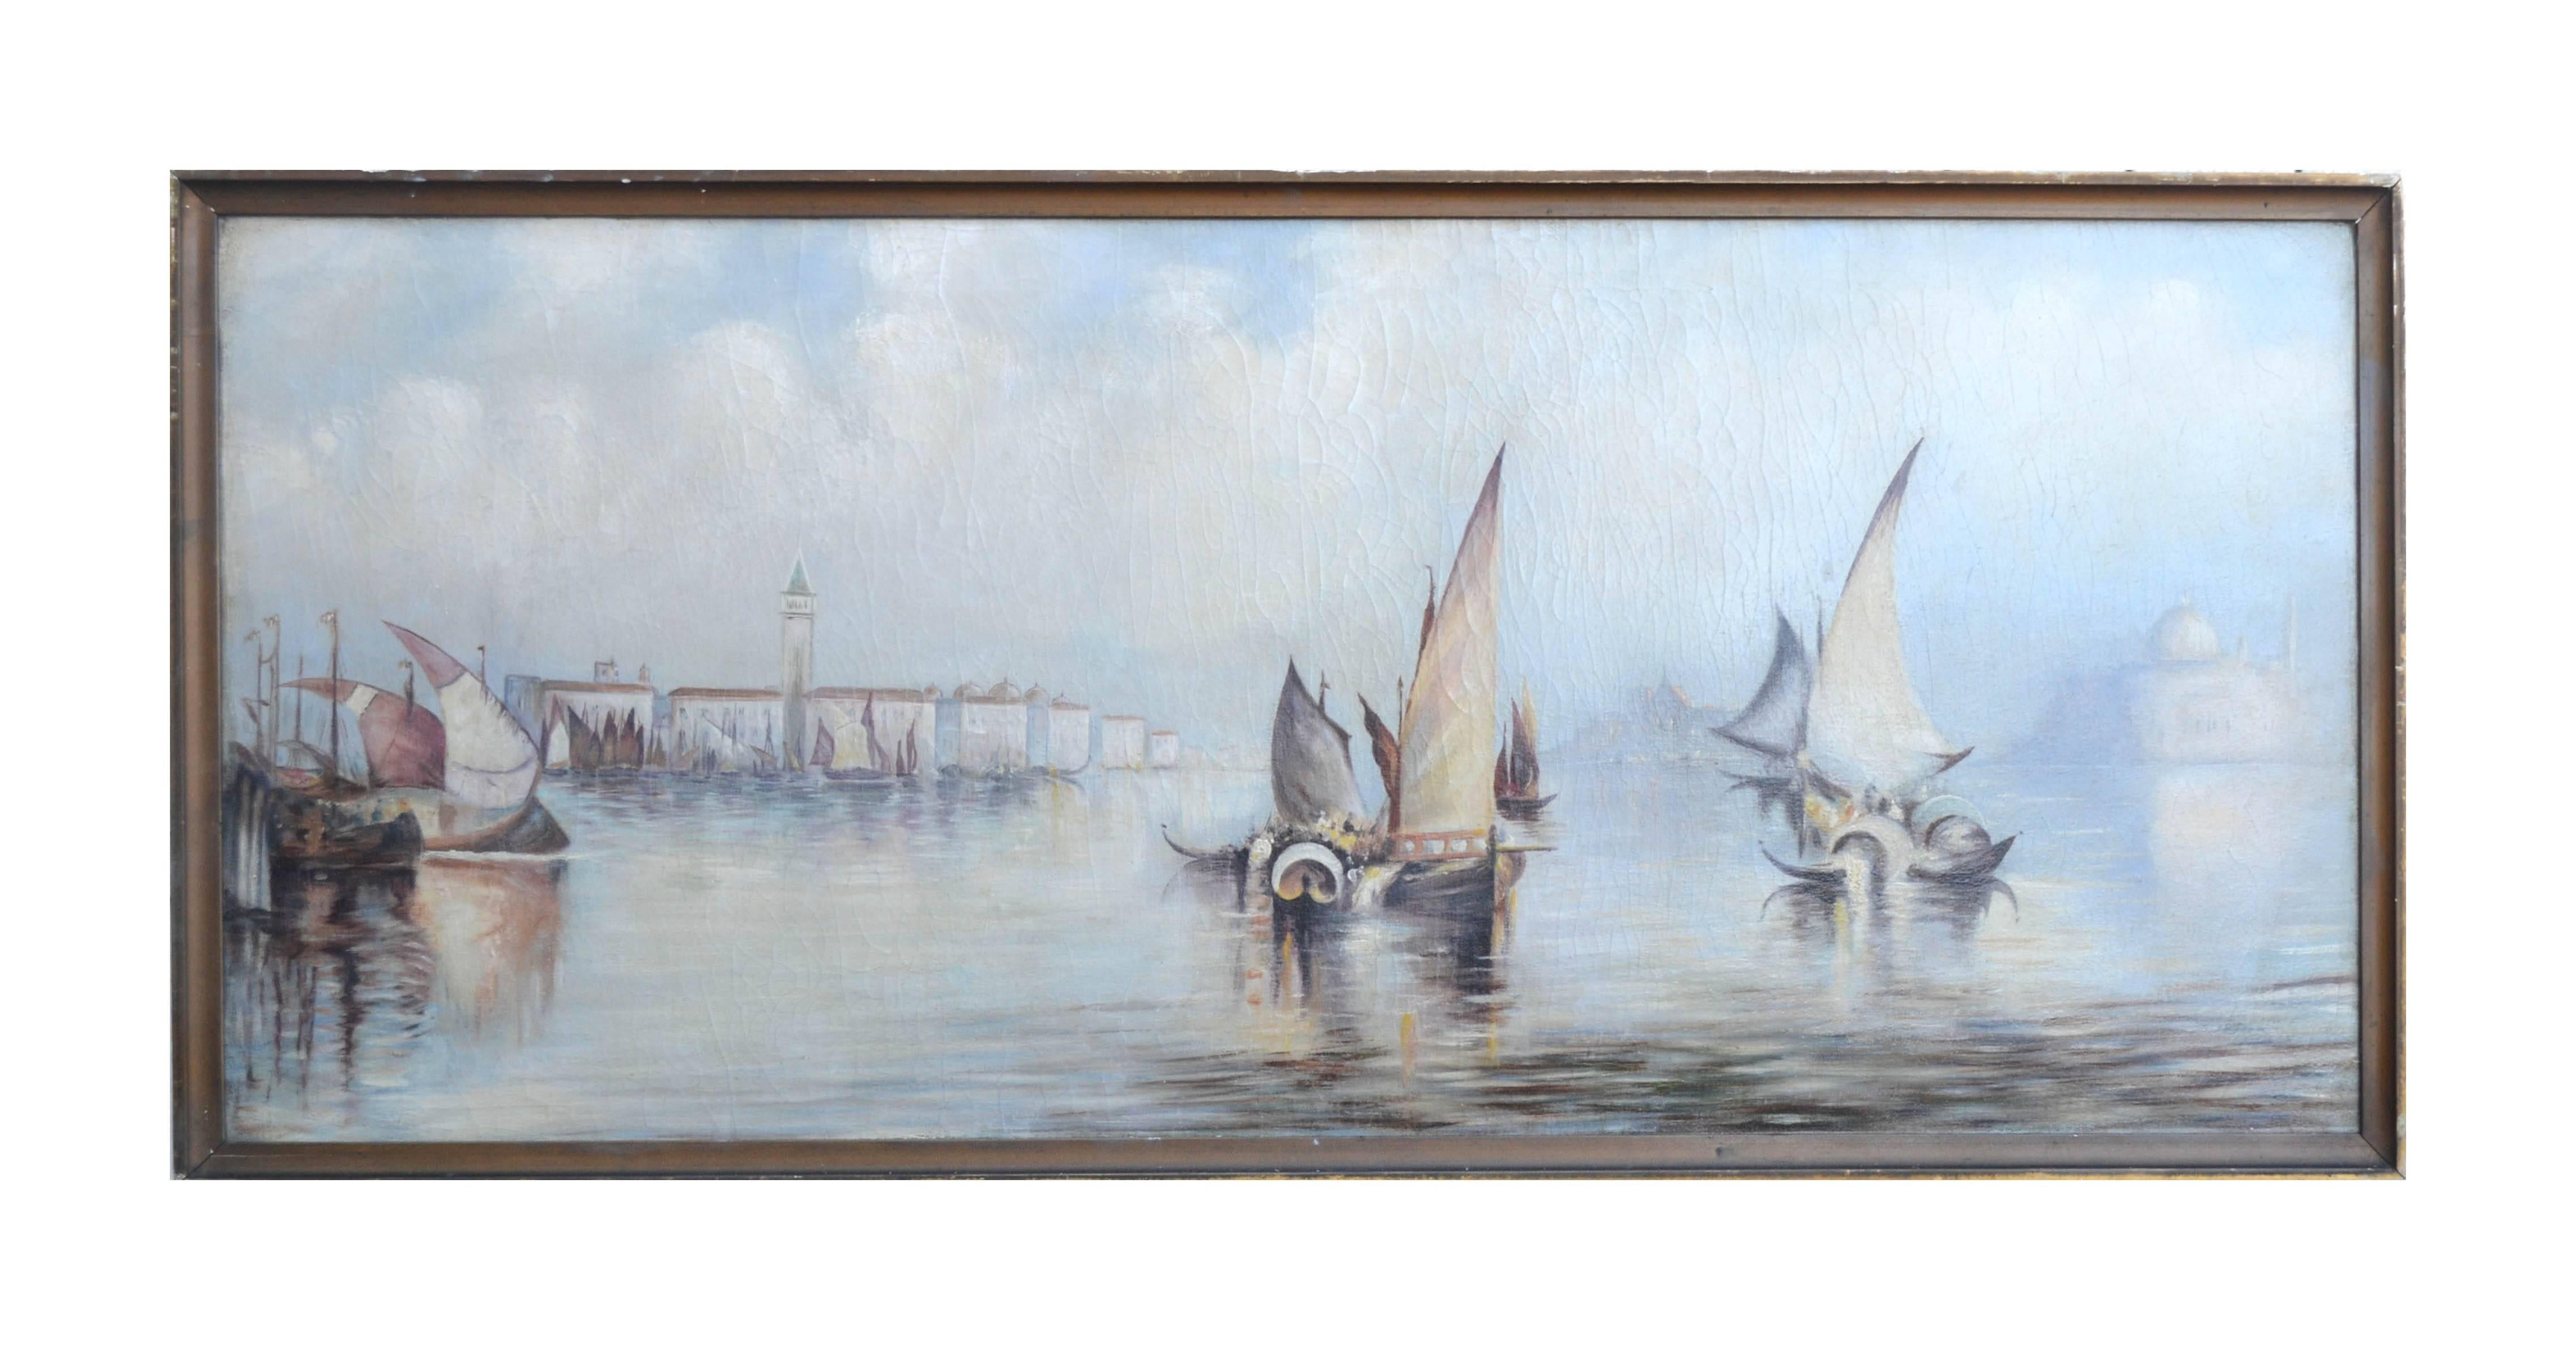 Unknown Landscape Painting - 1920's Boats on the Nile Landscape